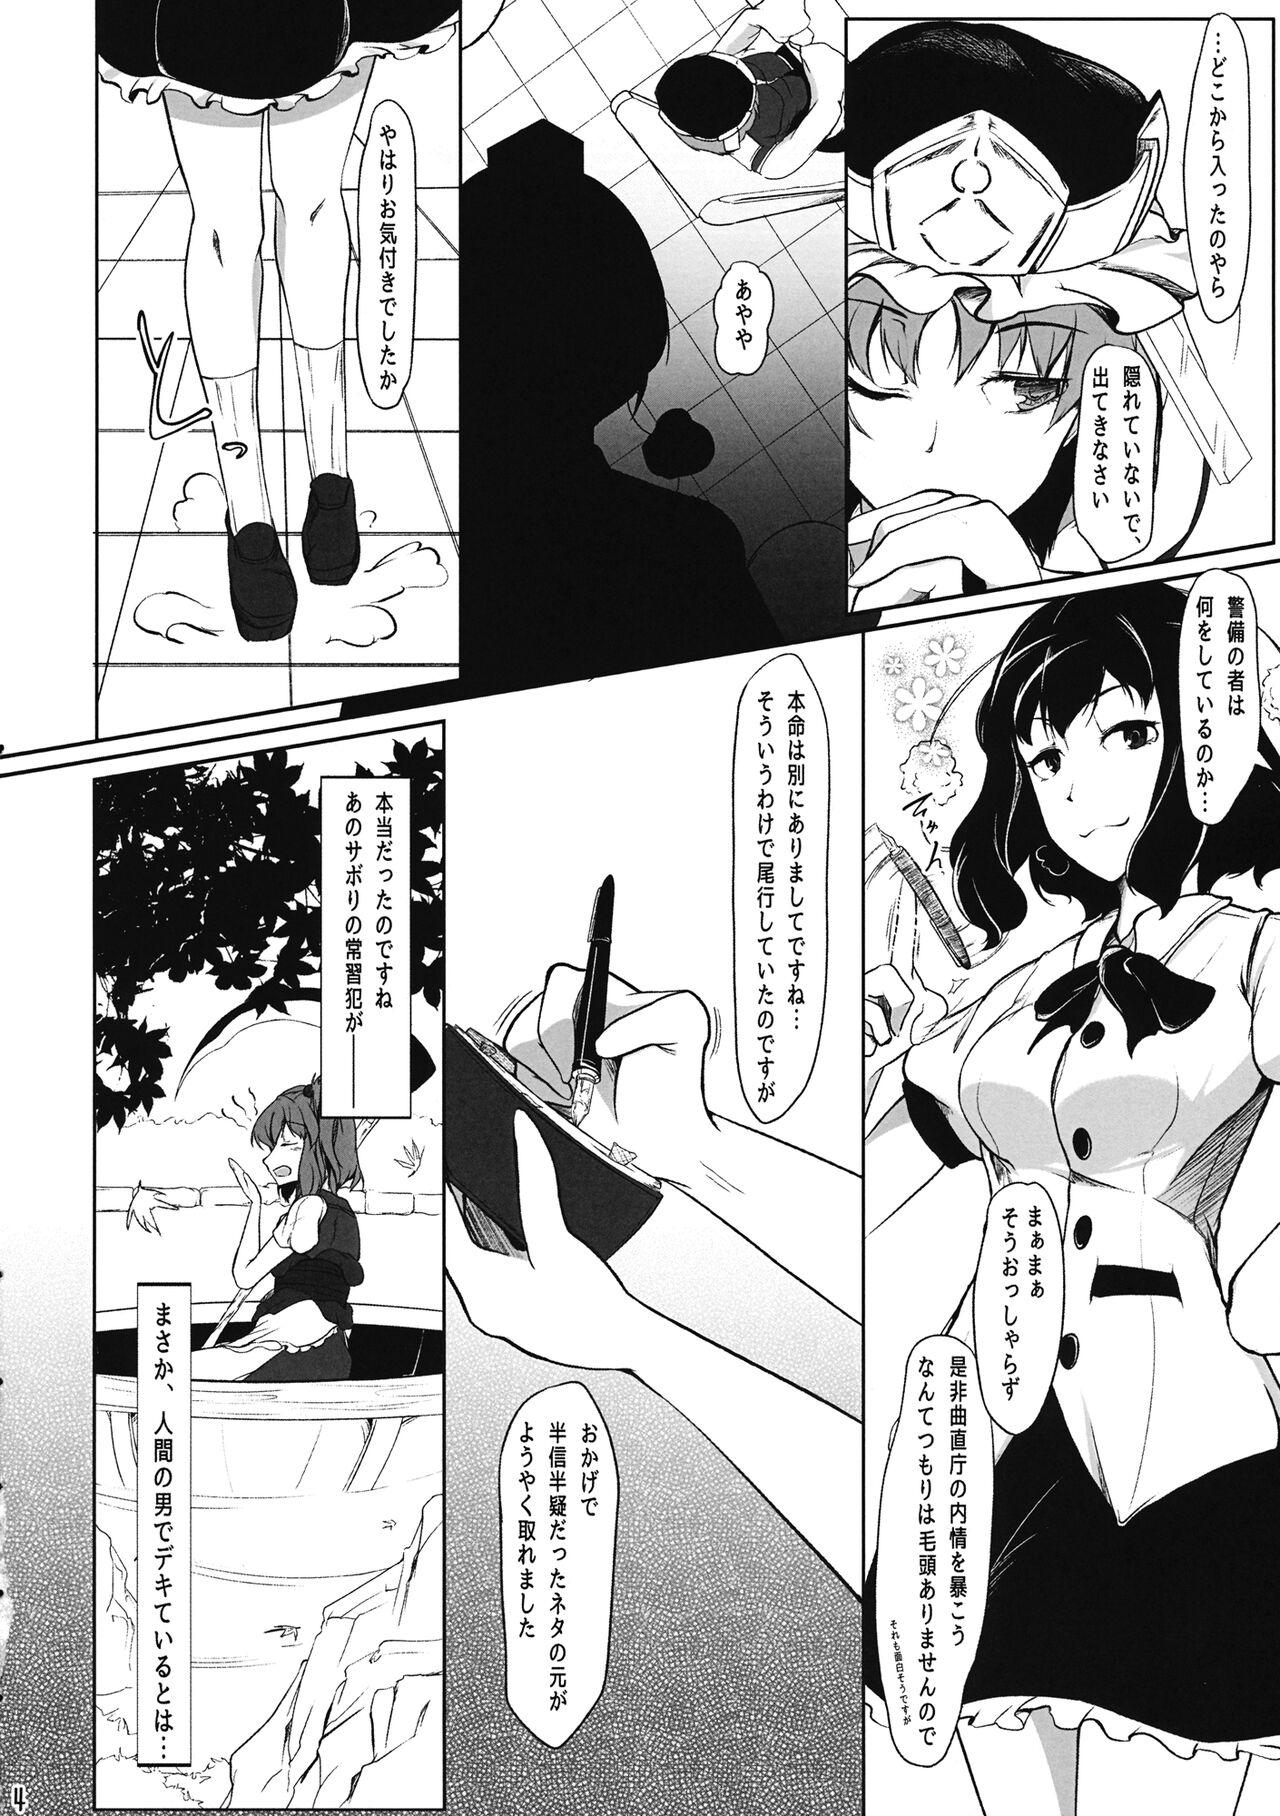 Jerkoff Shinigami Kanojo - Love and let Die. - Touhou project Deutsch - Page 3